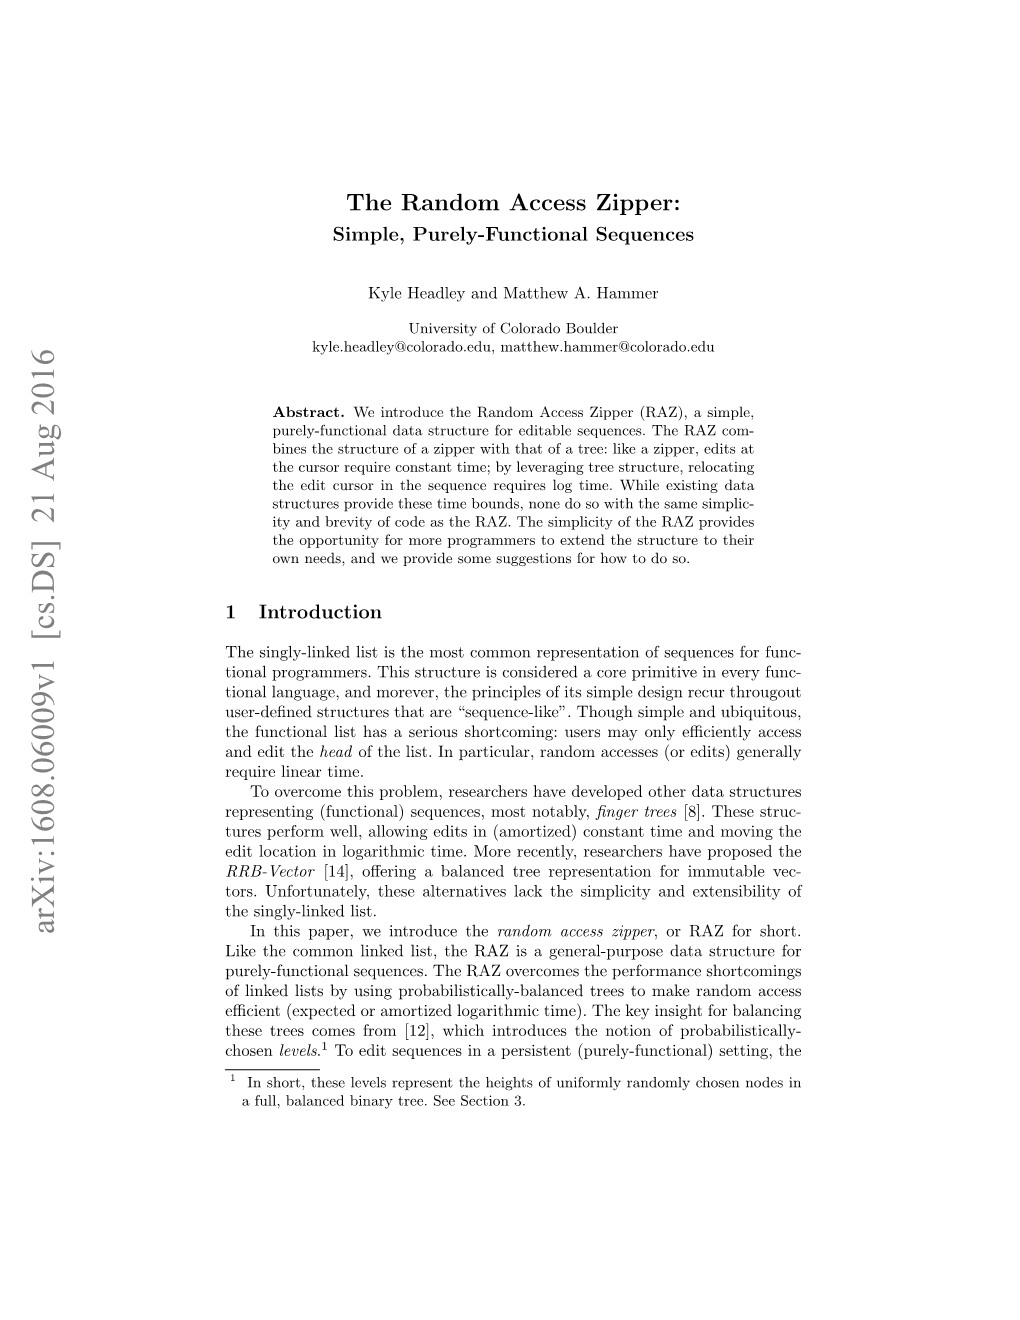 The Random Access Zipper: Simple, Purely-Functional Sequences